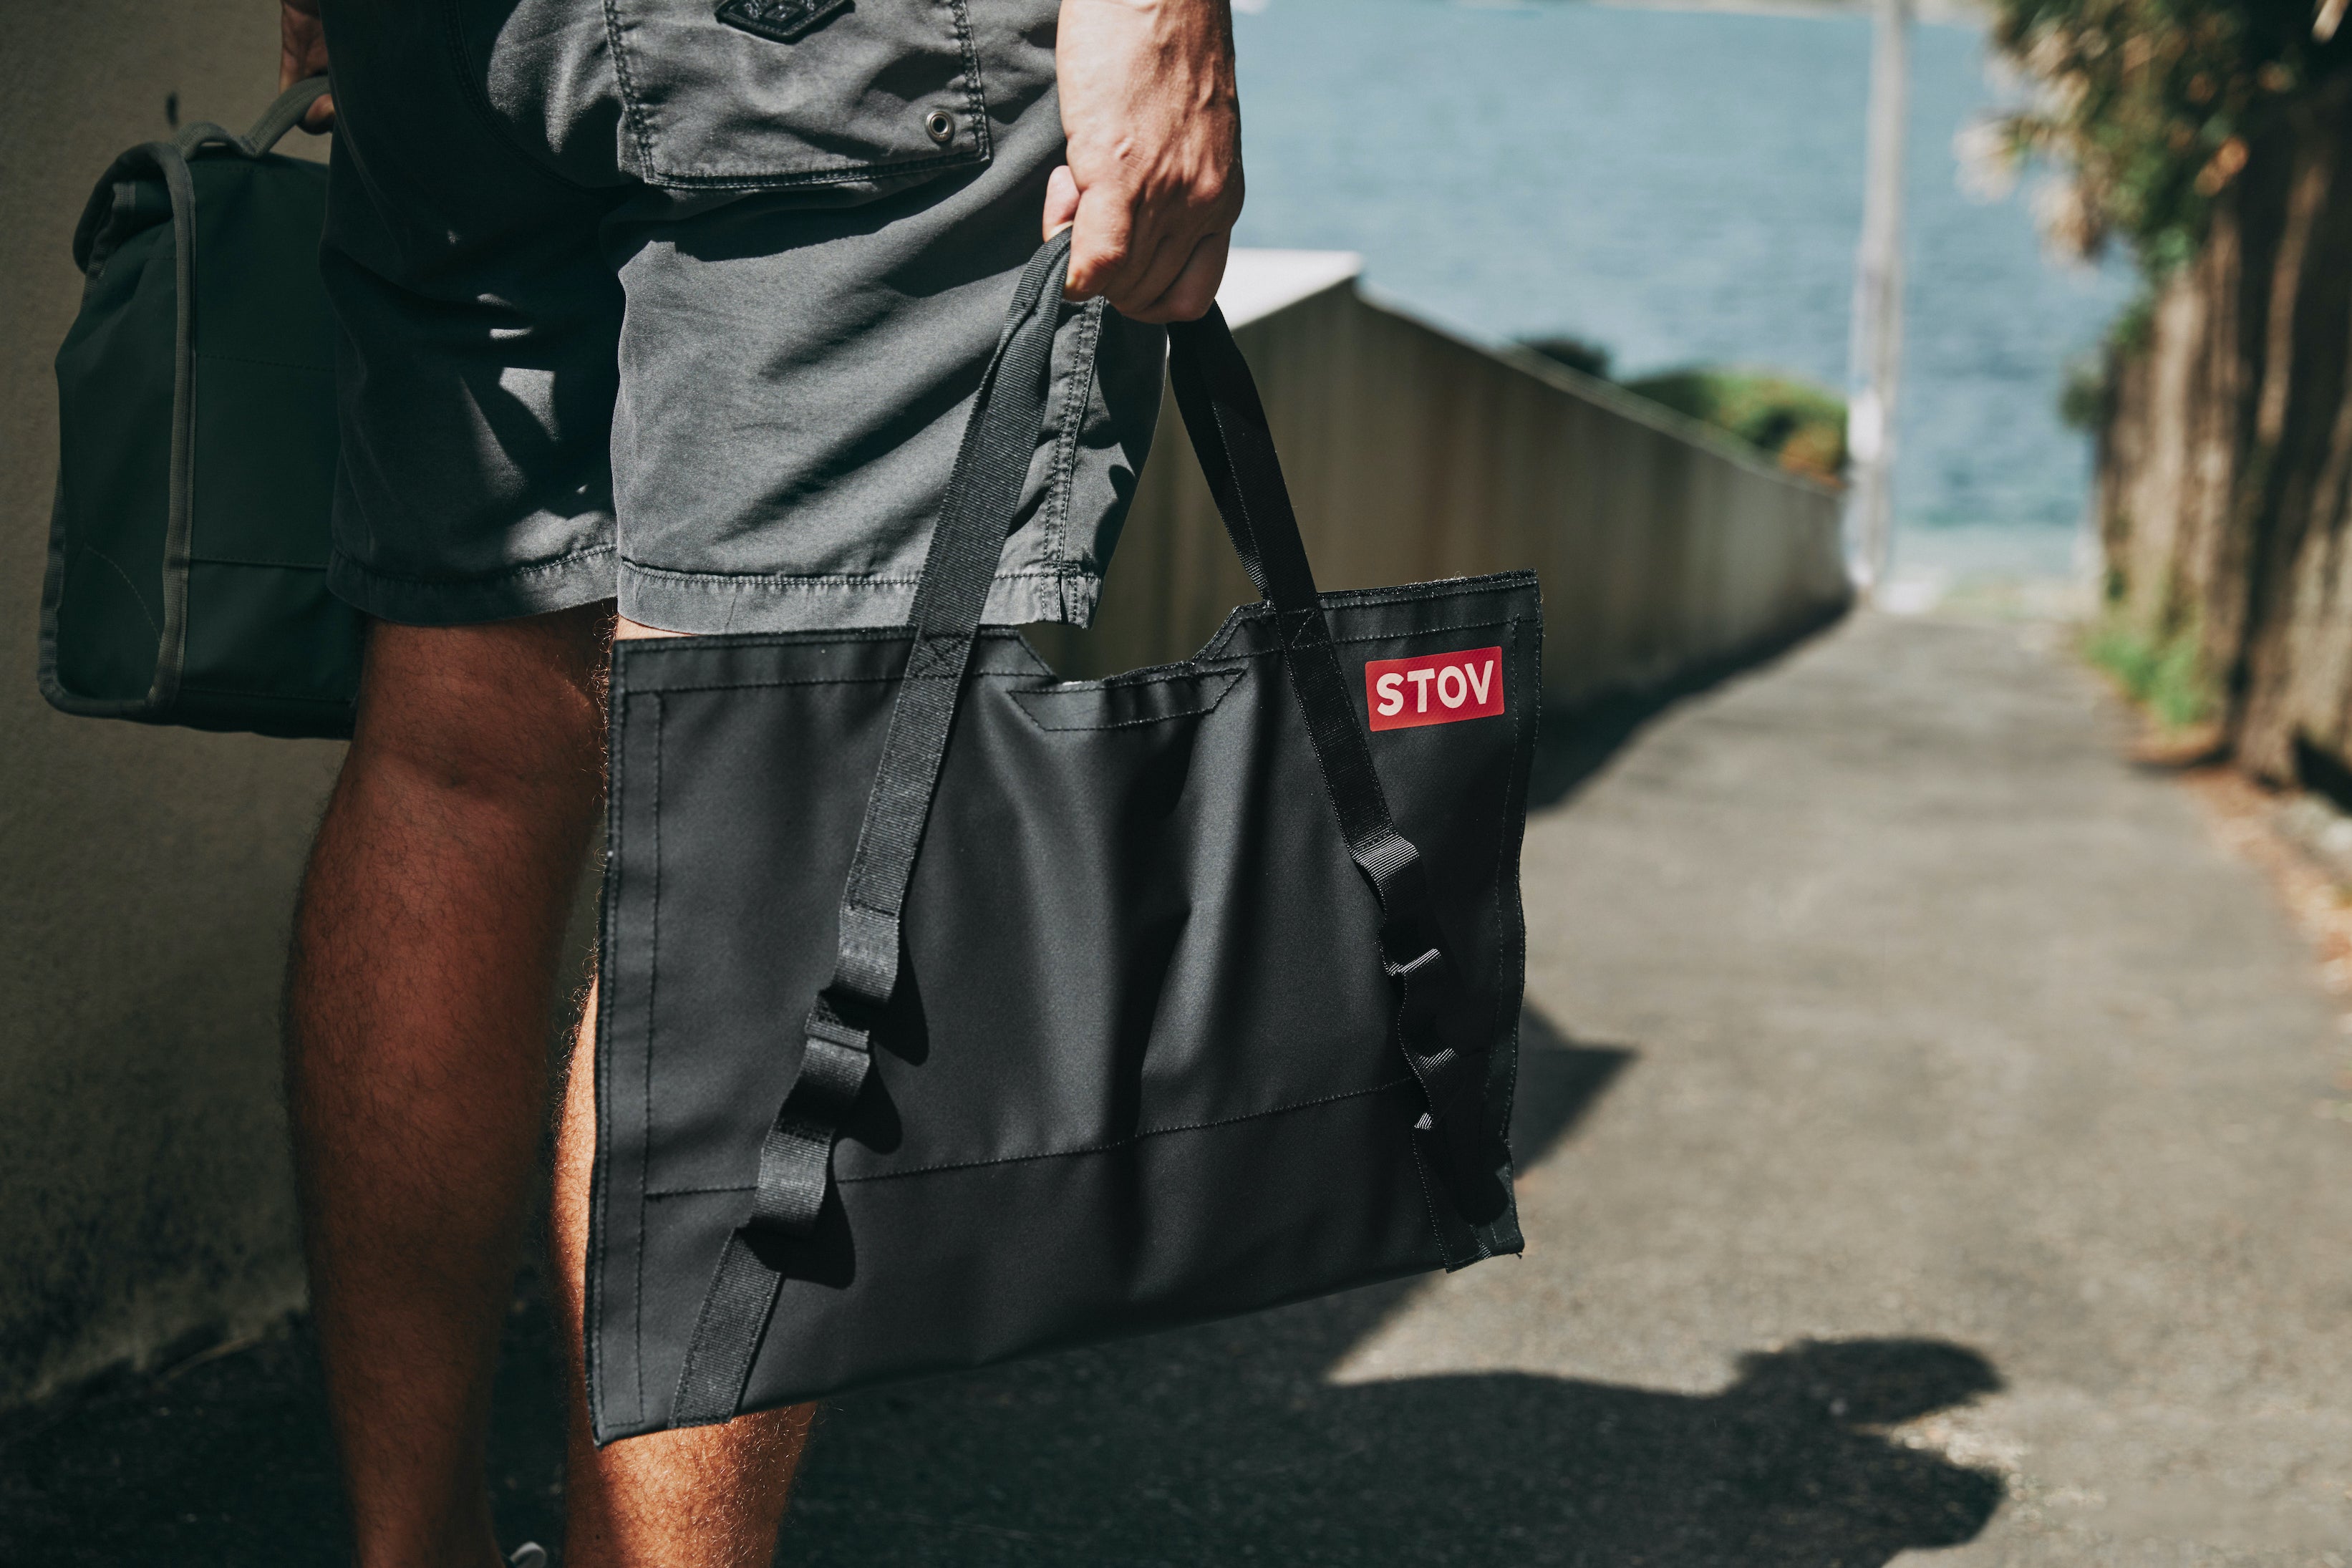 Carry the STOV BBQ in its handy carry back in style. The black bag contrasts out portable bbqs.